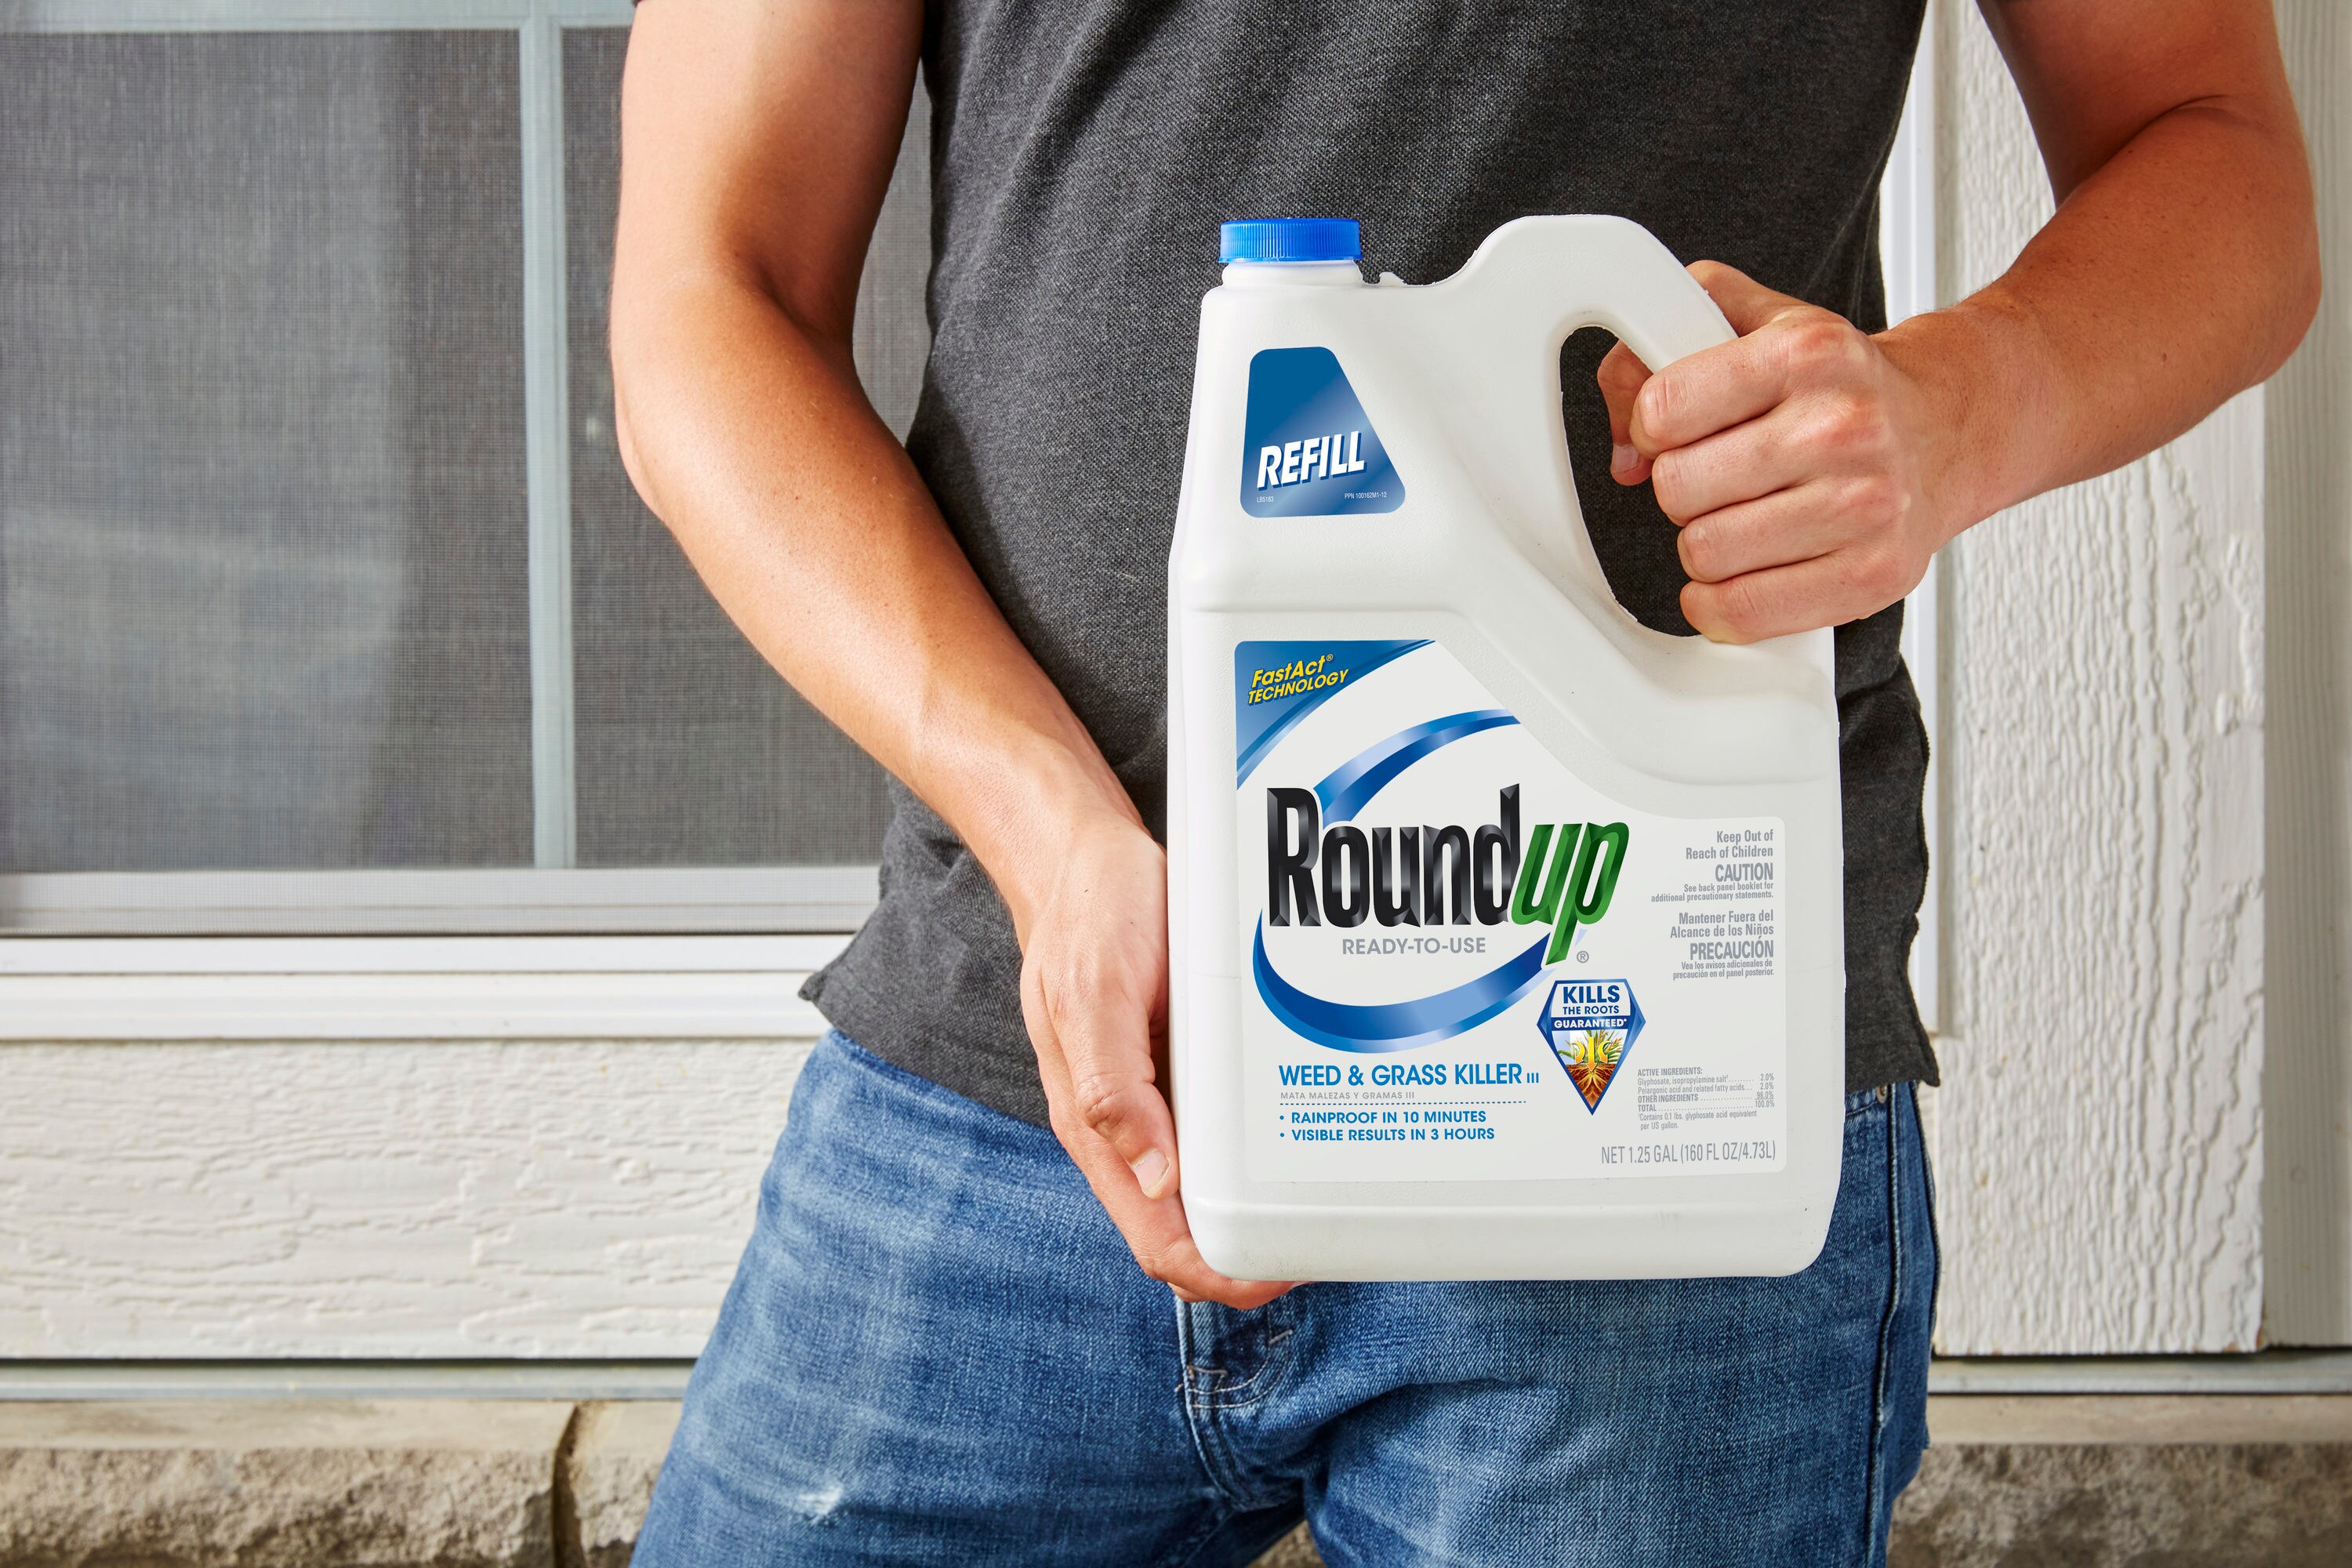 Roundup Product Bundle Ready to Use Weed and Grass Killer